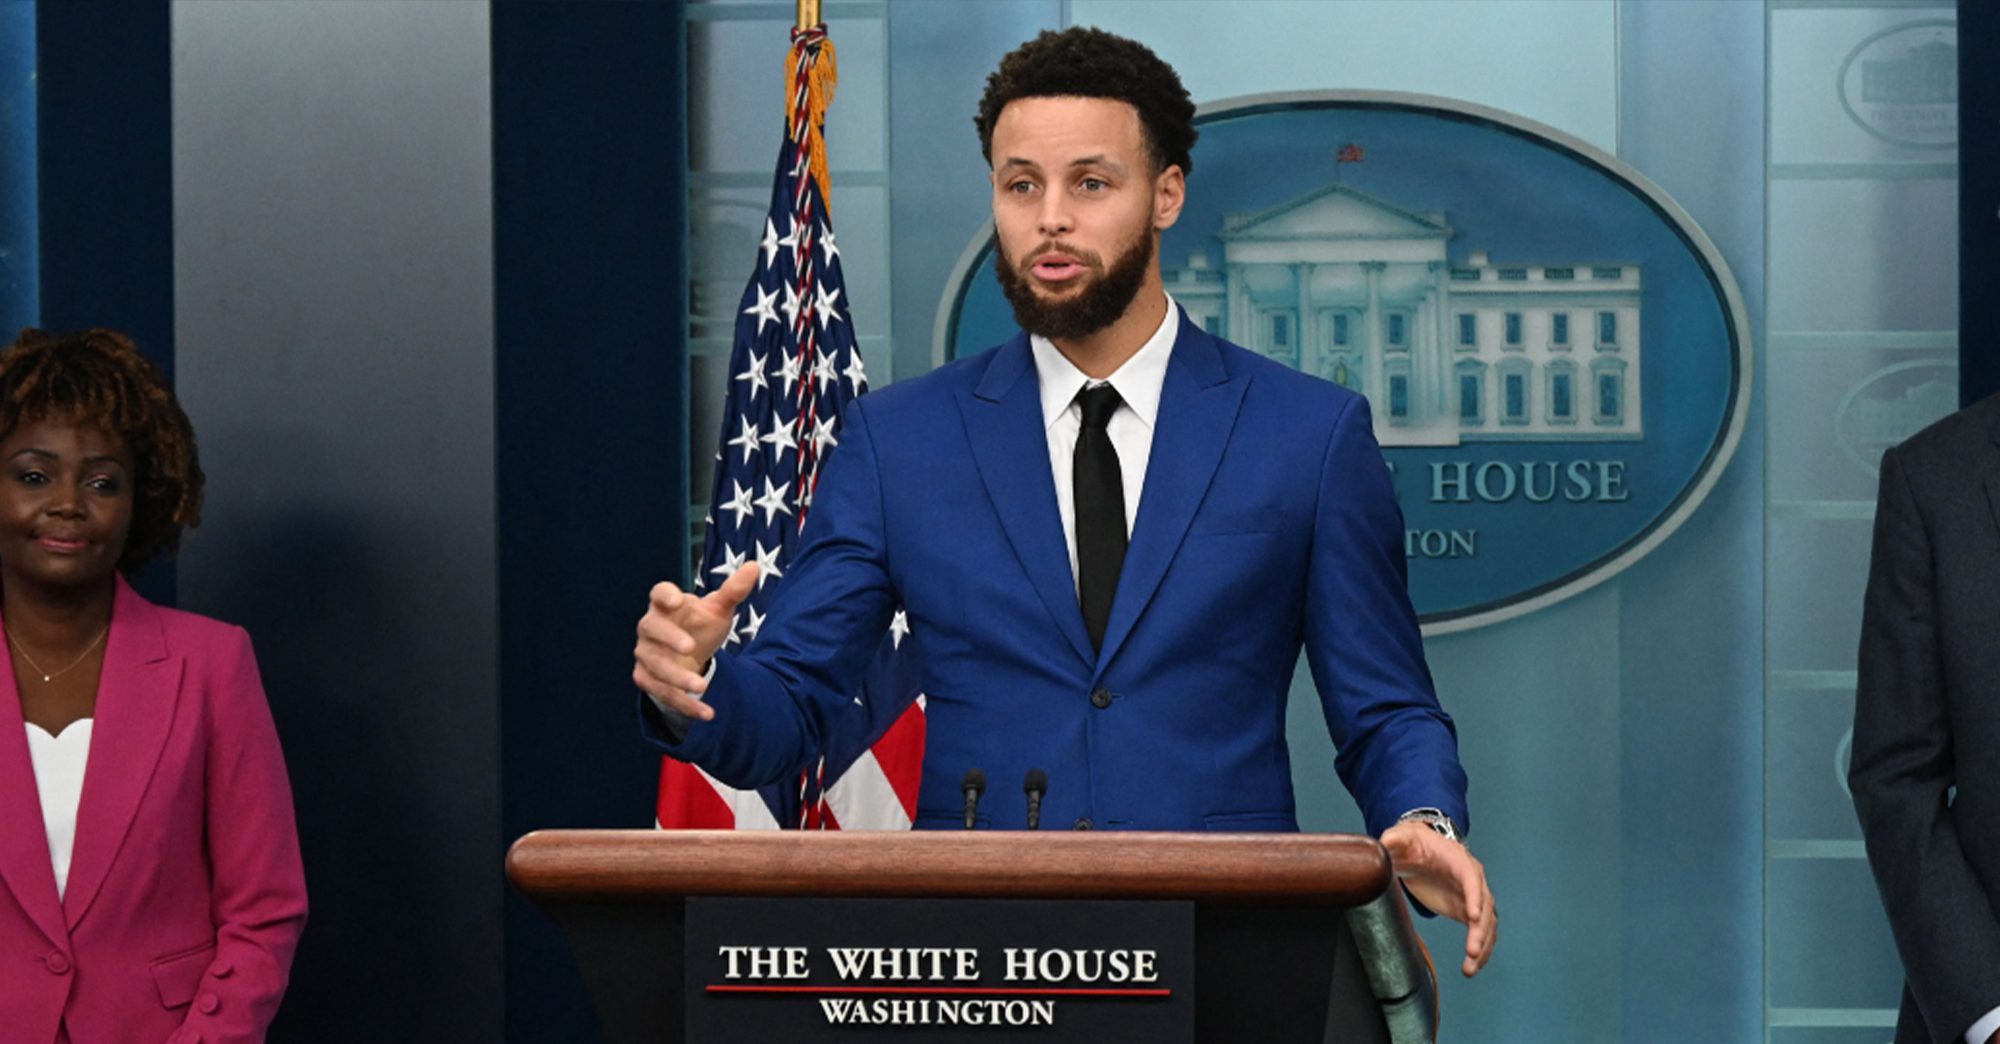 Steph Curry on Why He Isn’t Ruling Out Running for President